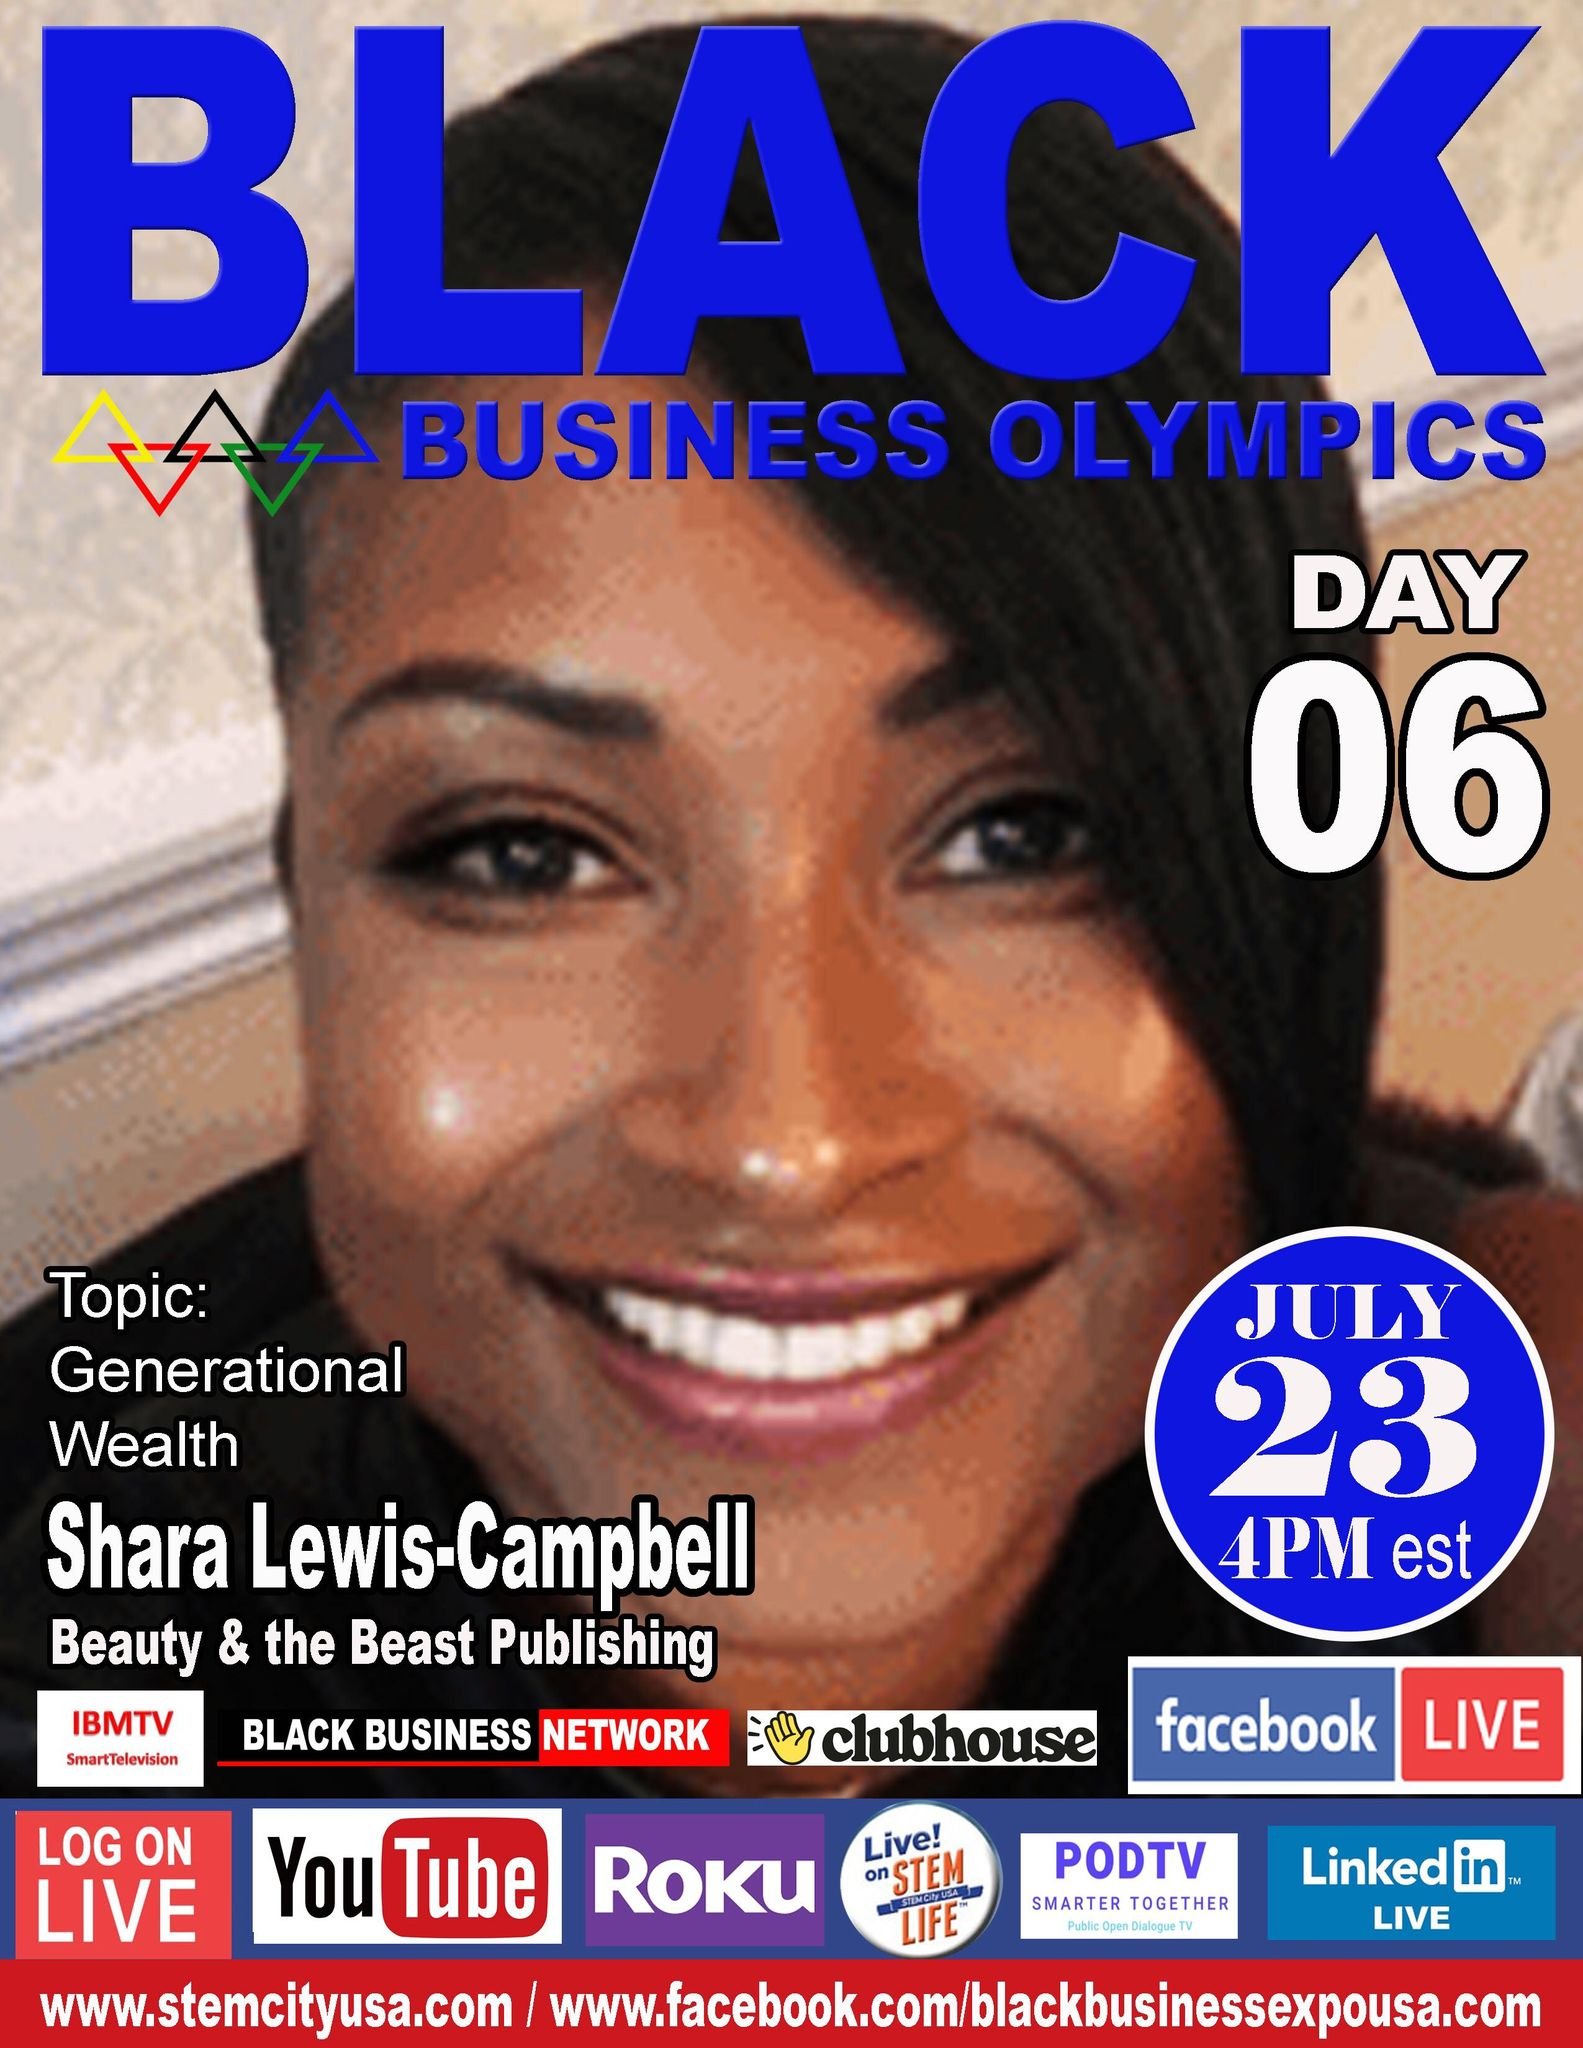 Black Business Olympics Expo USA Virtual Conference event, July 2022  - Beauty & the Beast Publishing Gold Medal Award Winners for Black Business Olympics Speaker, for their keynote presentation on Generational Wealth.